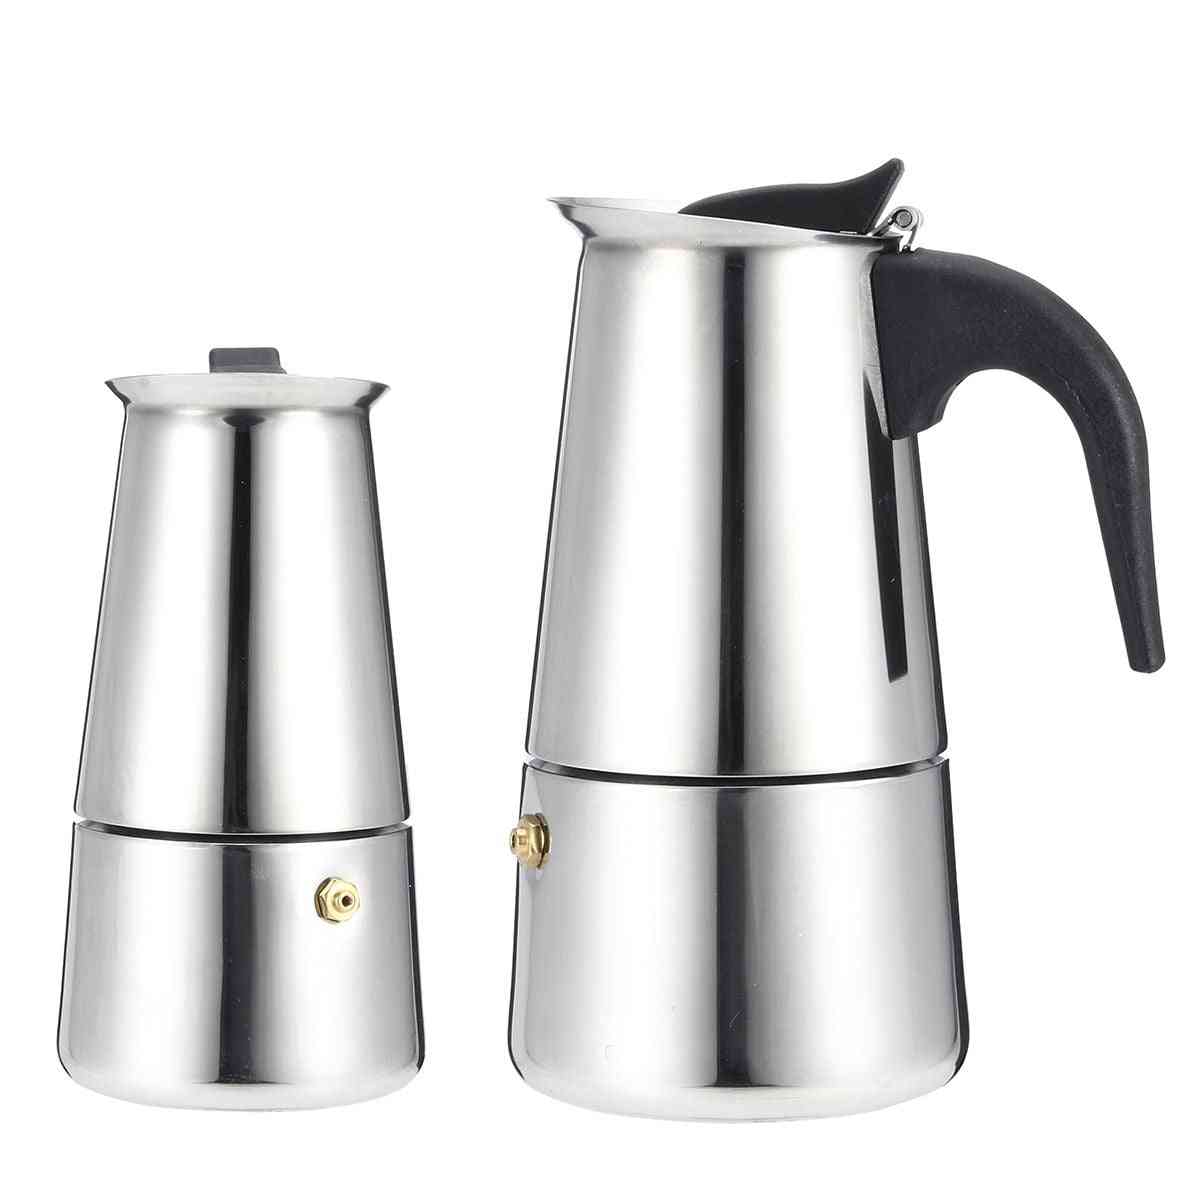 Stainless Steel Espresso Coffee Maker, Moka Pot With Electric Stove, Filter Kettle